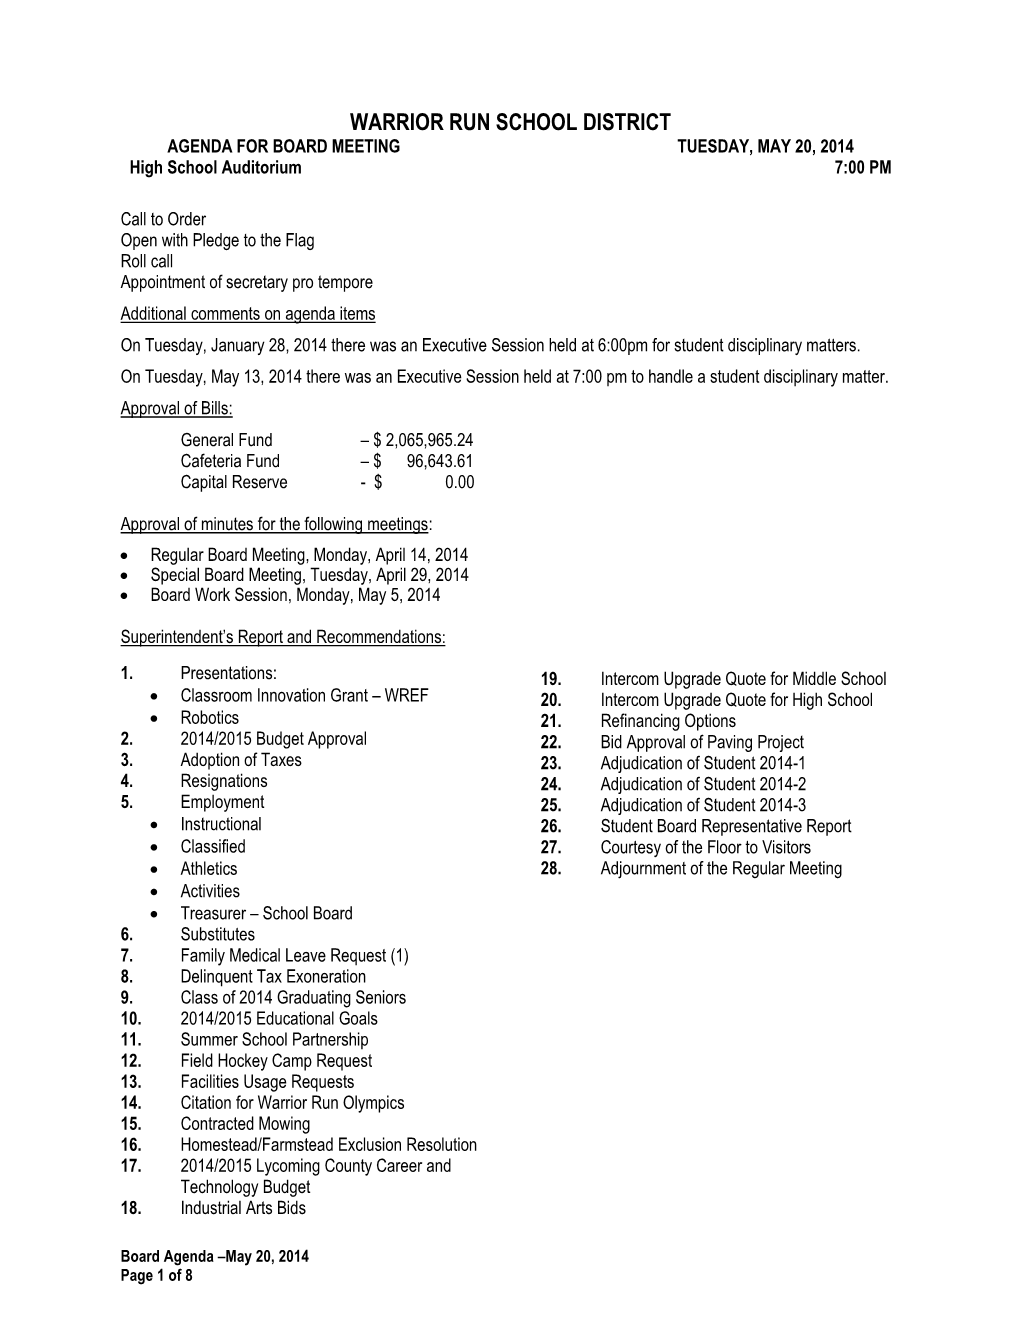 Board Agenda –May 20, 2014 Page 1 of 8 SUPERINTENDENT’S REPORT and RECOMMENDATIONS May 20, 2014